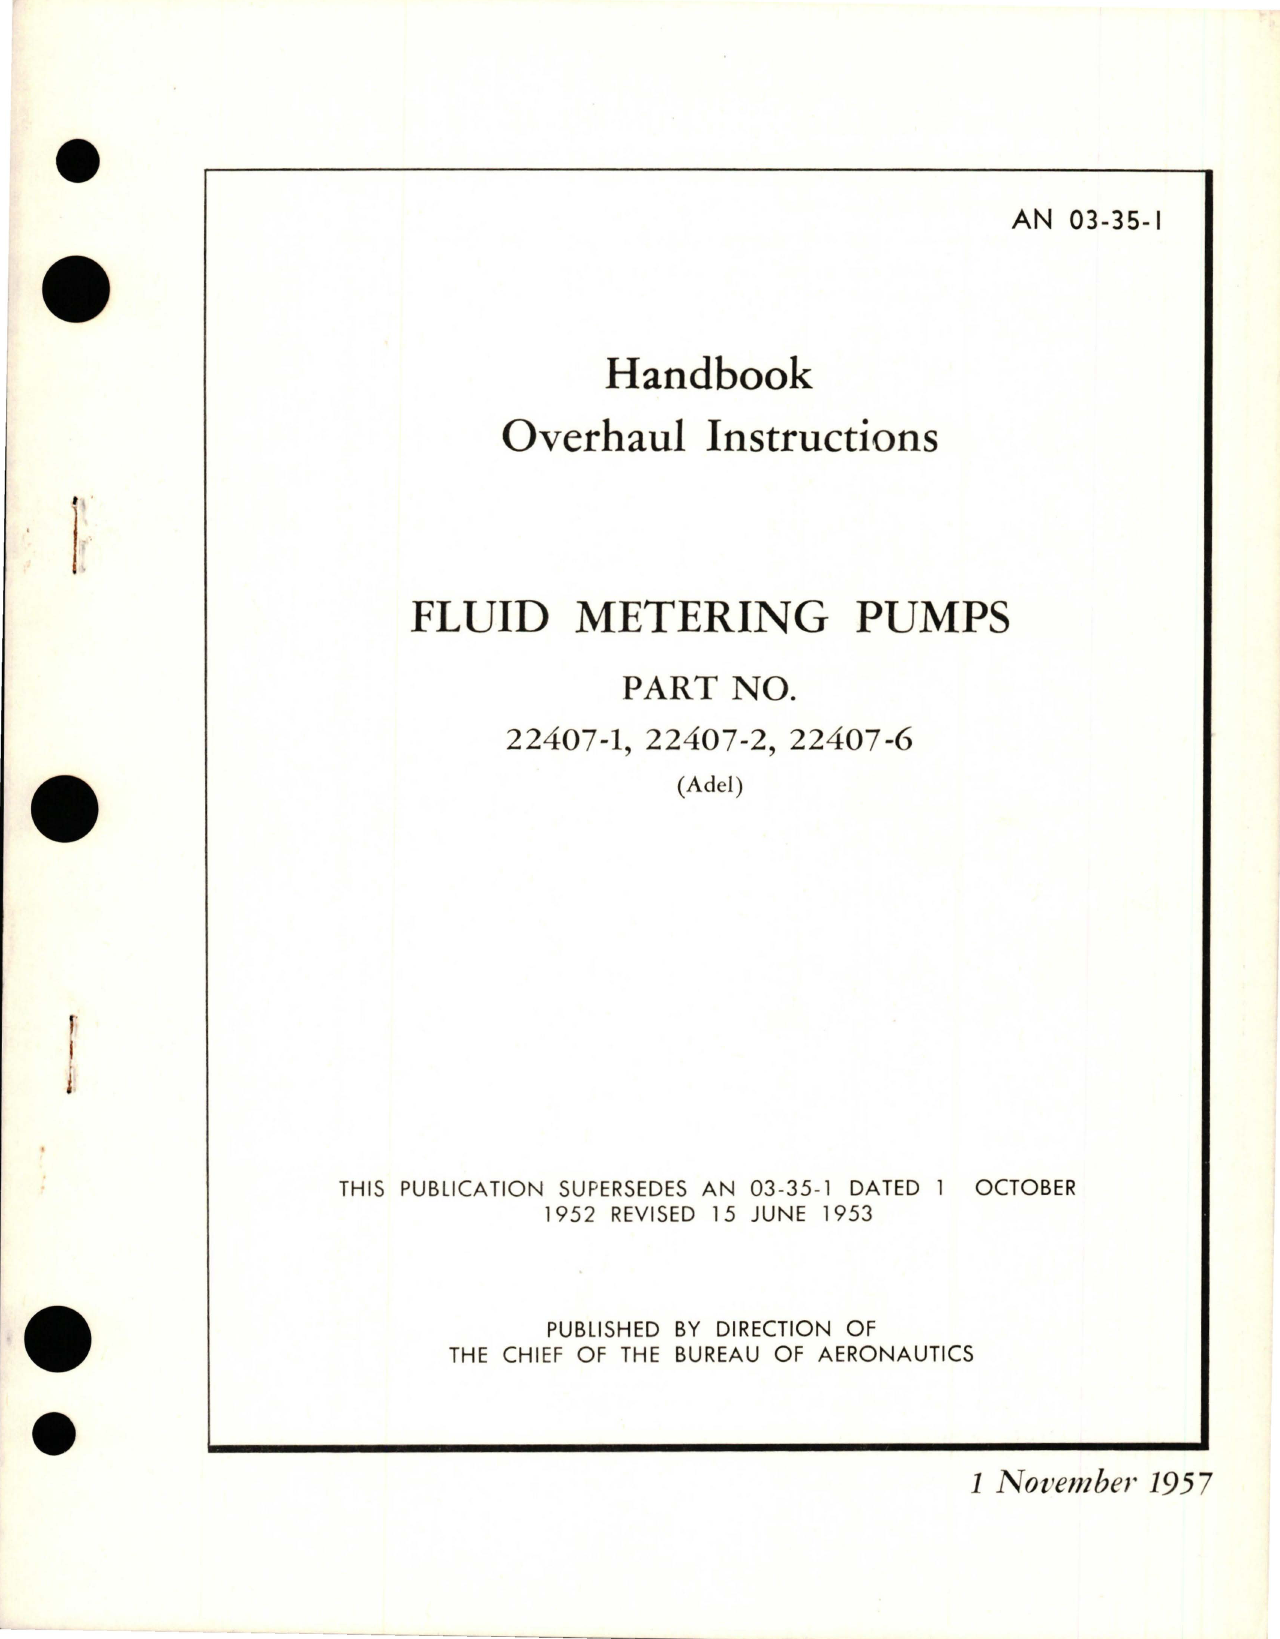 Sample page 1 from AirCorps Library document: Overhaul Instructions for Fluid Metering Pumps - Parts 22407-1, 22407-2, and 22407-6 